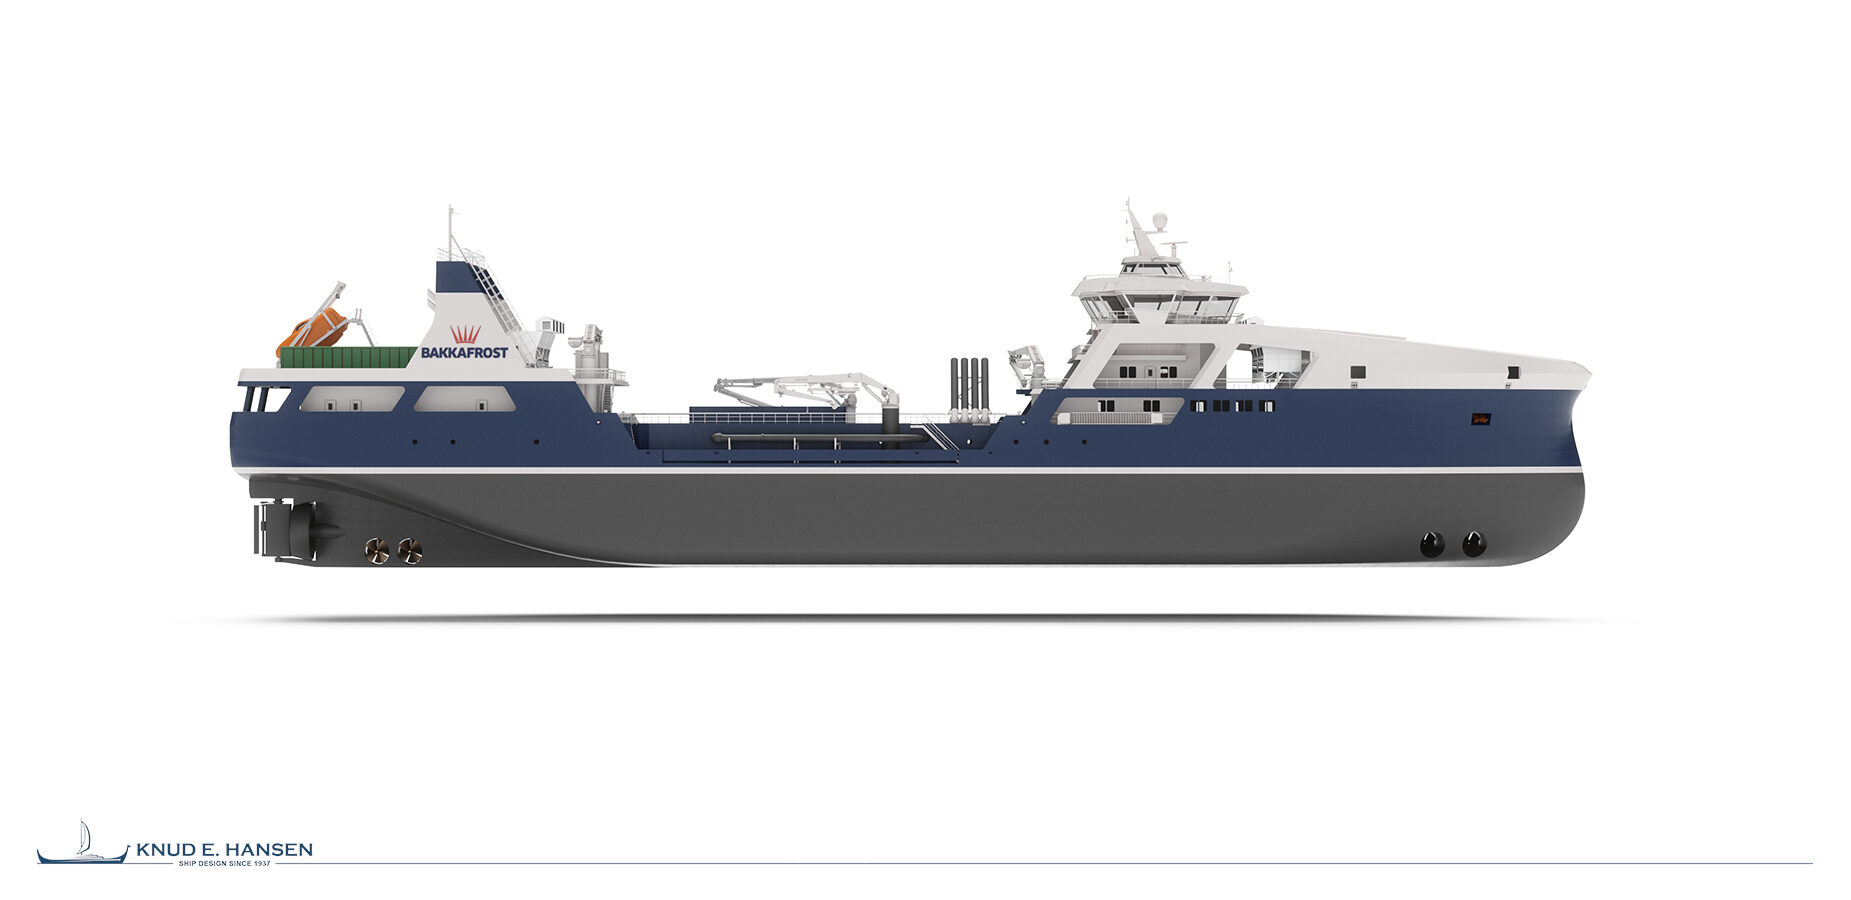 Rolls Royce To Design And Power Live Fish Carrier For The Faroe Islands